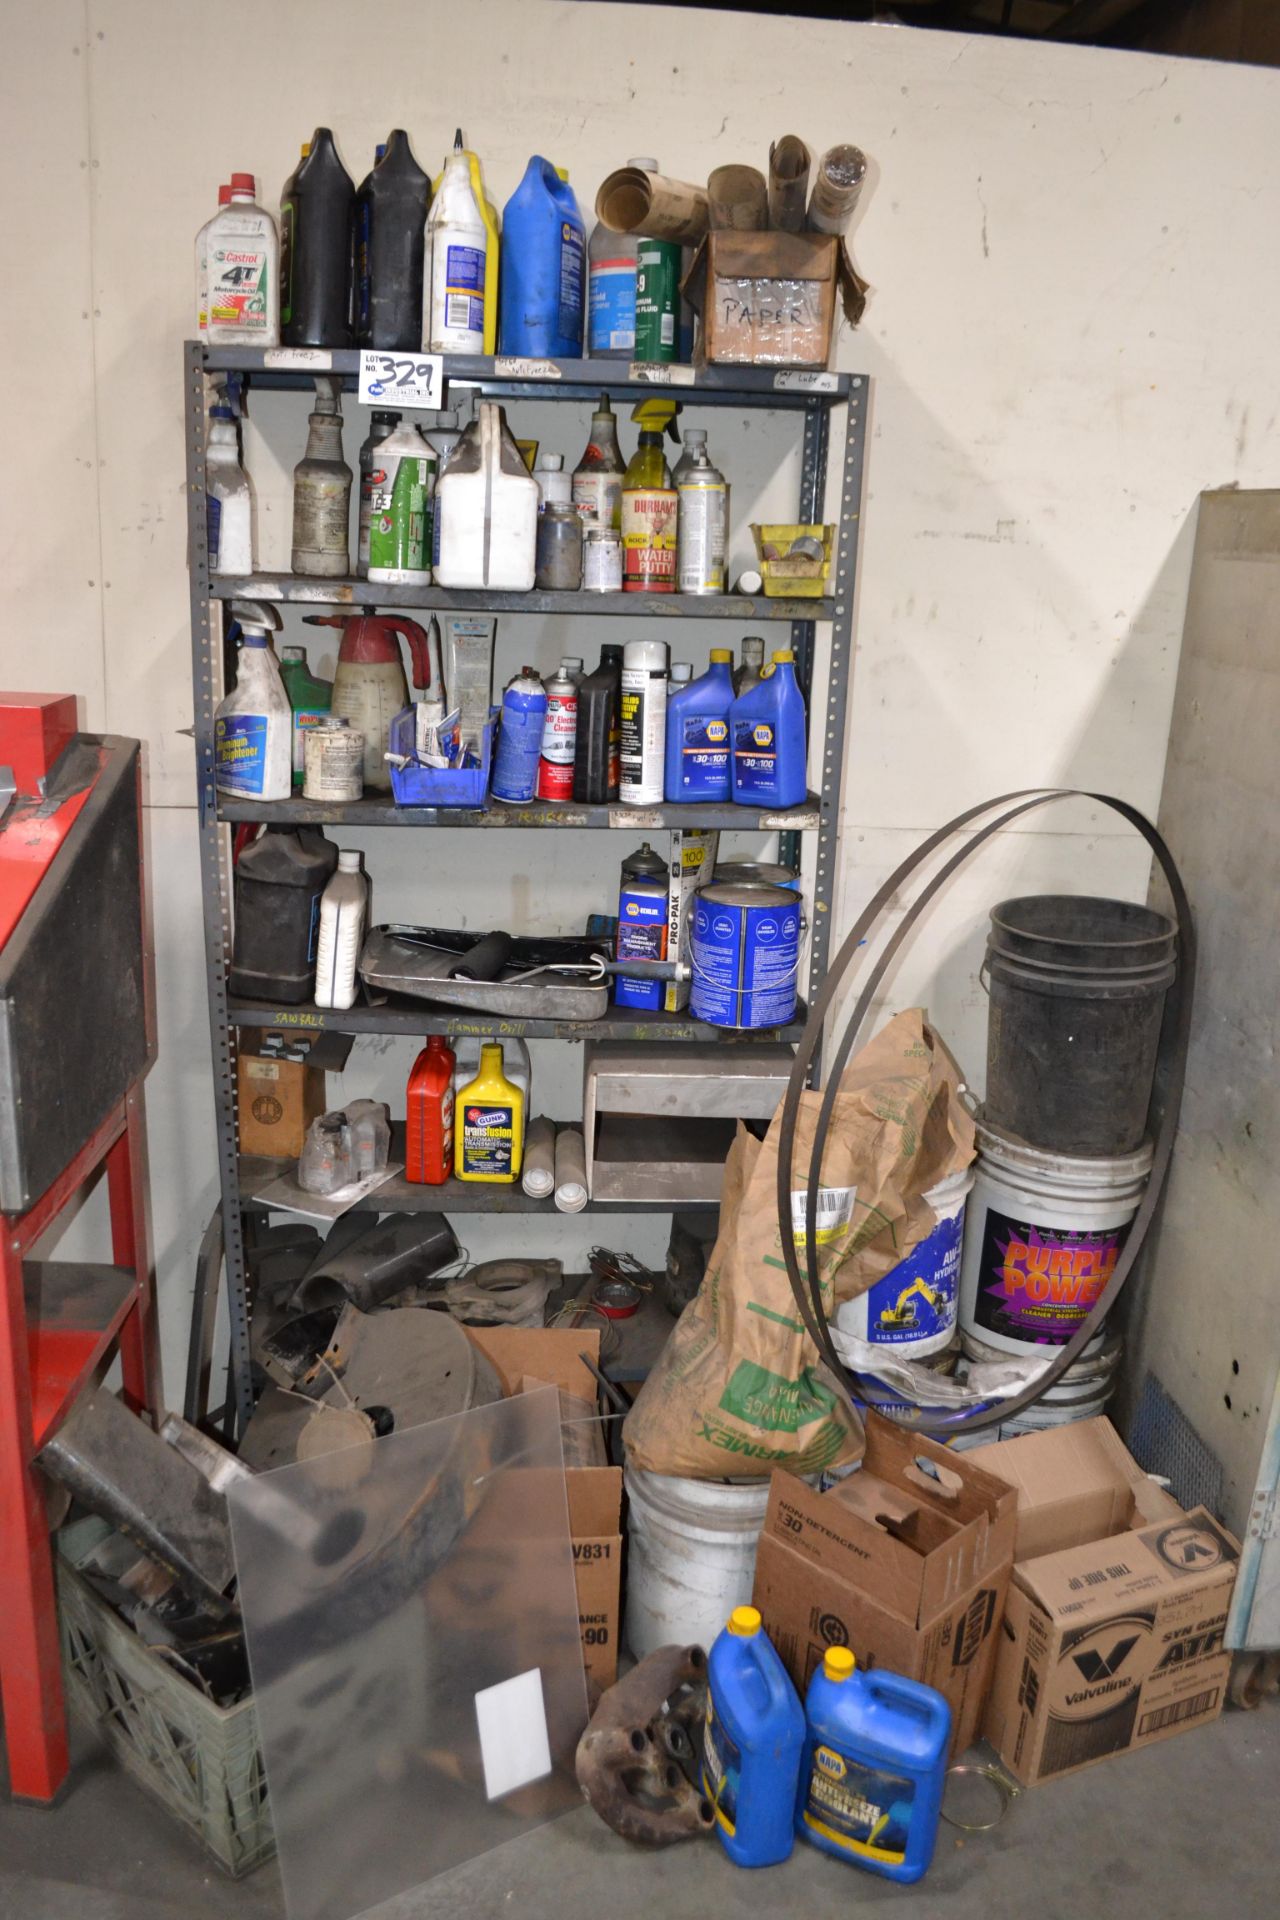 Metal Shelving Unit with assorted oils, cleaners, etc.